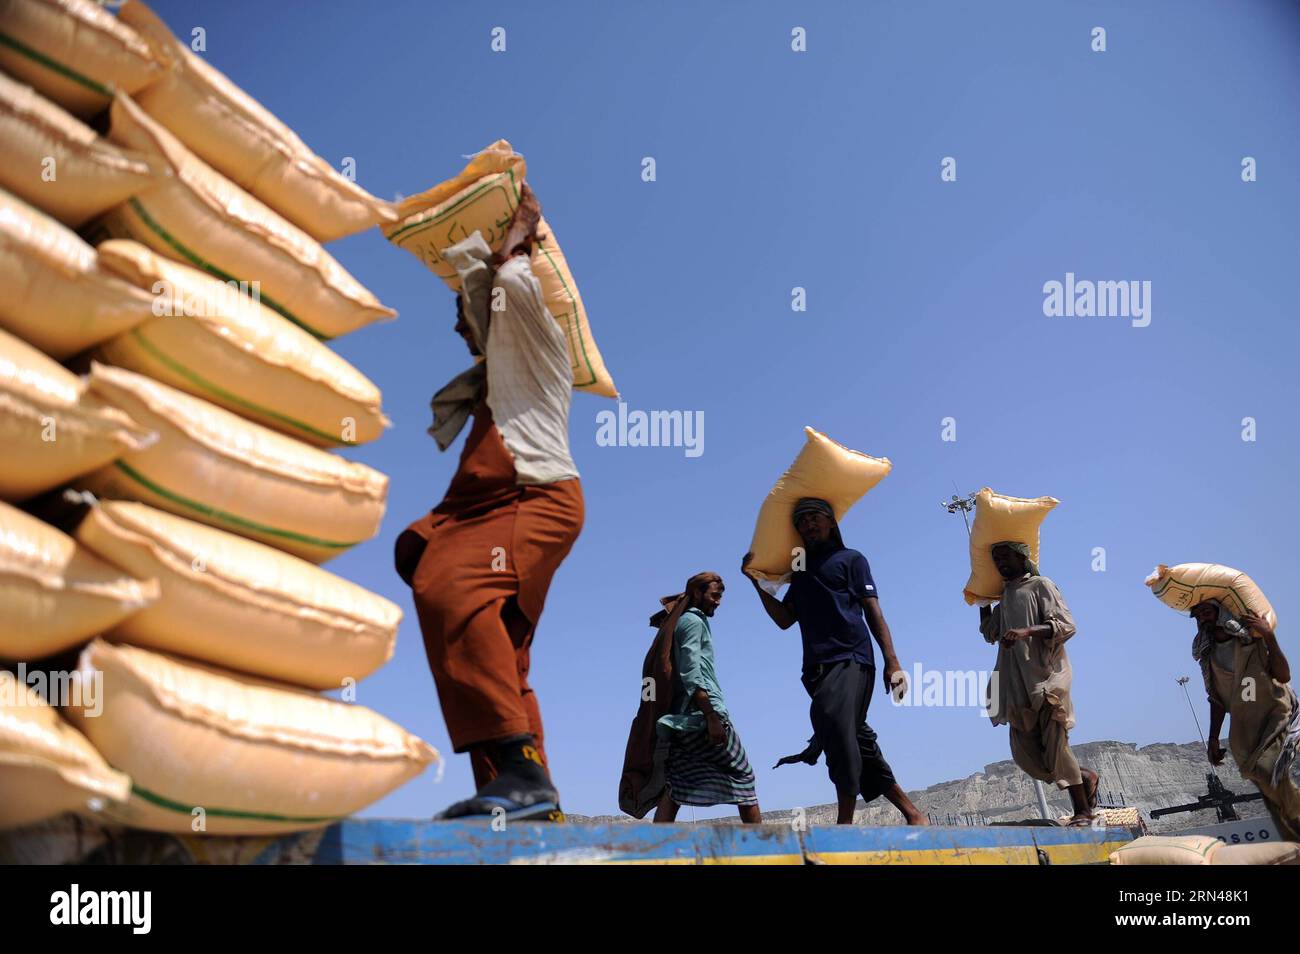 (150512) -- KARACHI,   -- Dockers carry feed bags at the pier of Gwadar Port, southwestern Pakistan, on May 11, 2015. Gwadar Port, a warm-water, deep-sea port, is located at the mouth of the Persian Gulf in Gwadar of Pakistan s Baloschistan province. China and Pakistan agreed to build China-Pakistan Economic Corridor (CPEC) to connect the Pakistani port with Kashgar city in China s Xinjiang Uygur Autonomous Region. It will shorten China s routes of oil and gas imports from Africa and the Middle East for thousands of kilometers, making Gwadar a potentially vital link in China s supply chain. Co Stock Photo